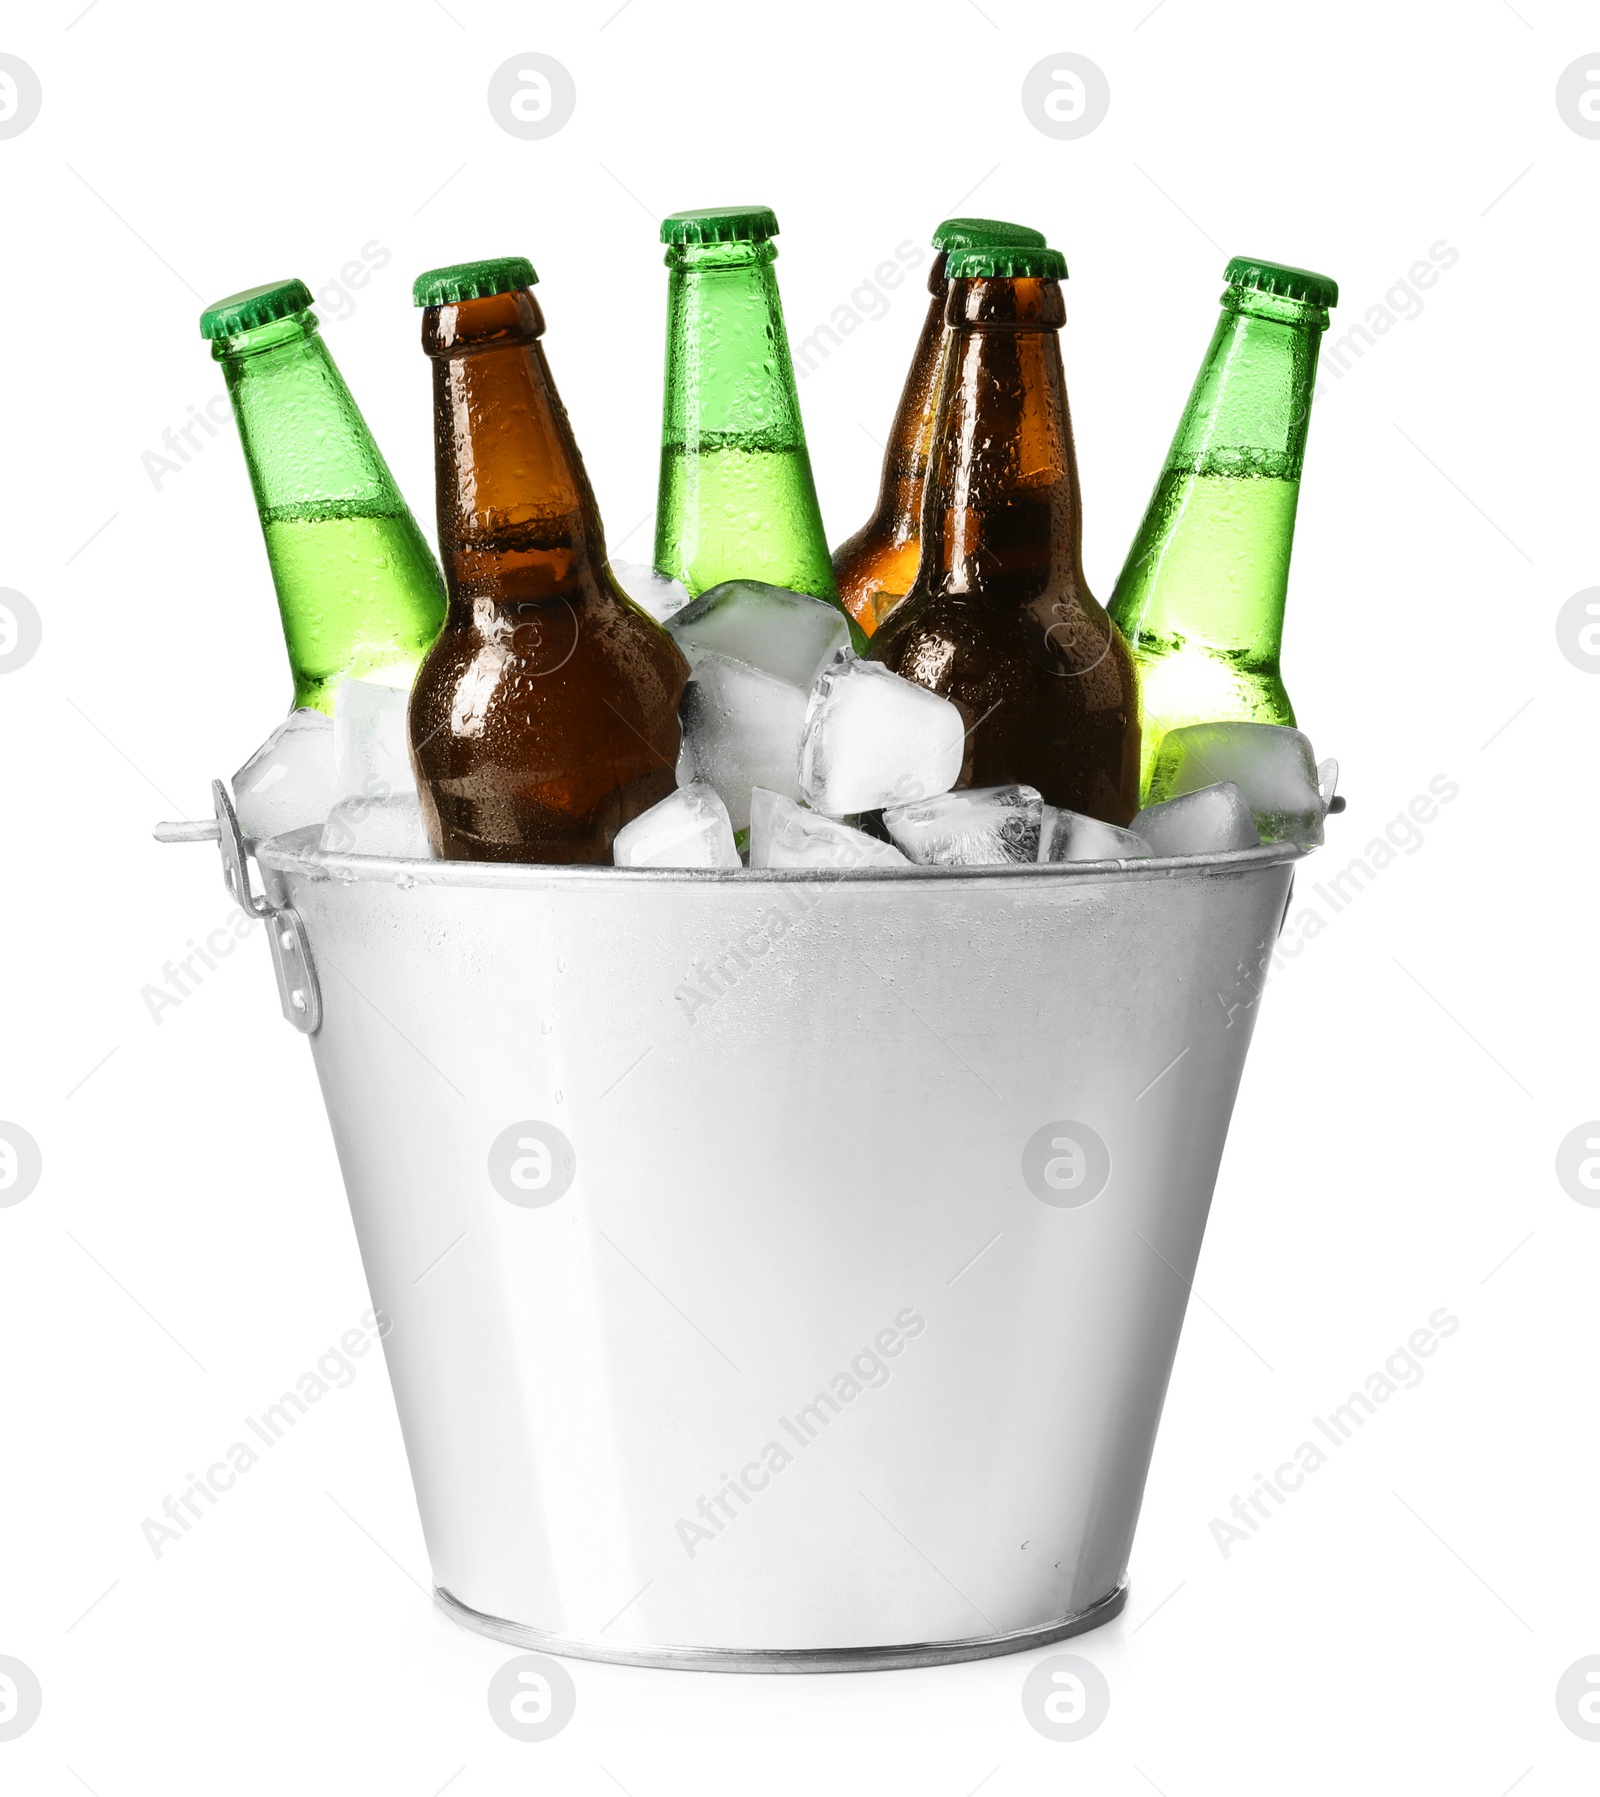 Photo of Metal bucket with different bottles of beer and ice cubes on white background